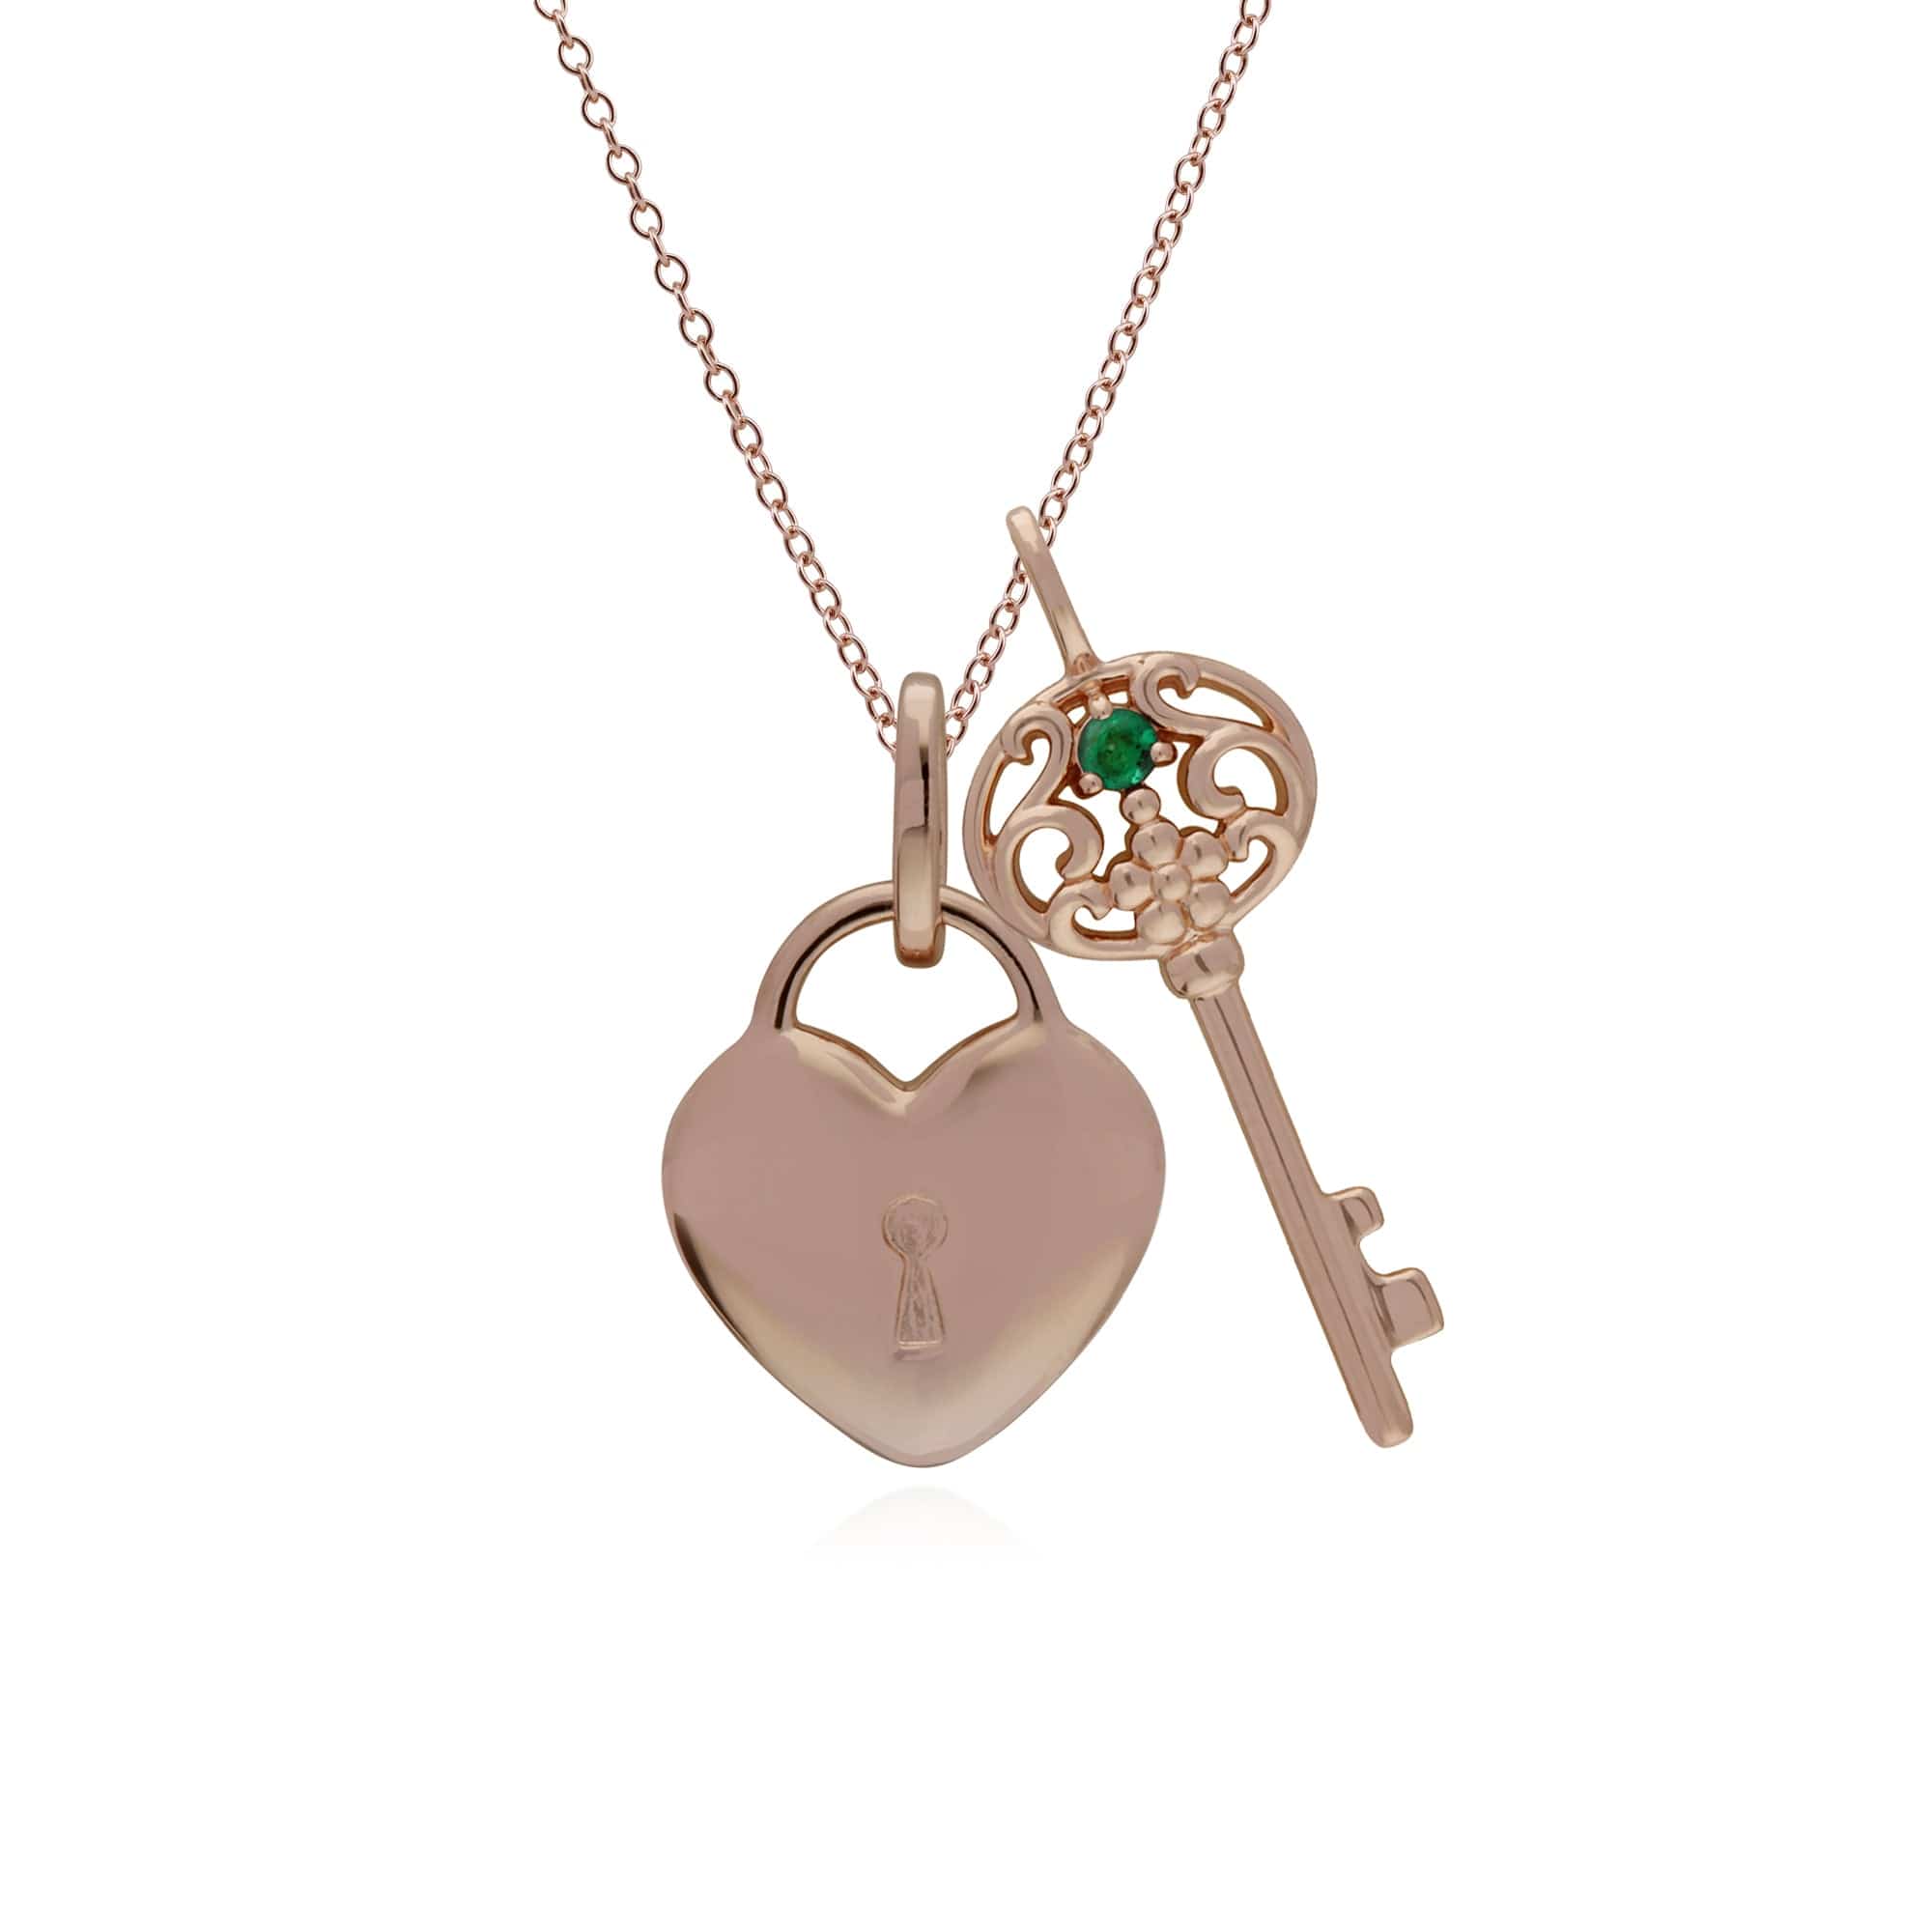 270P026704925-270P026901925 Classic Heart Lock Pendant & Emerald Big Key Charm in Rose Gold Plated 925 Sterling Silver 1